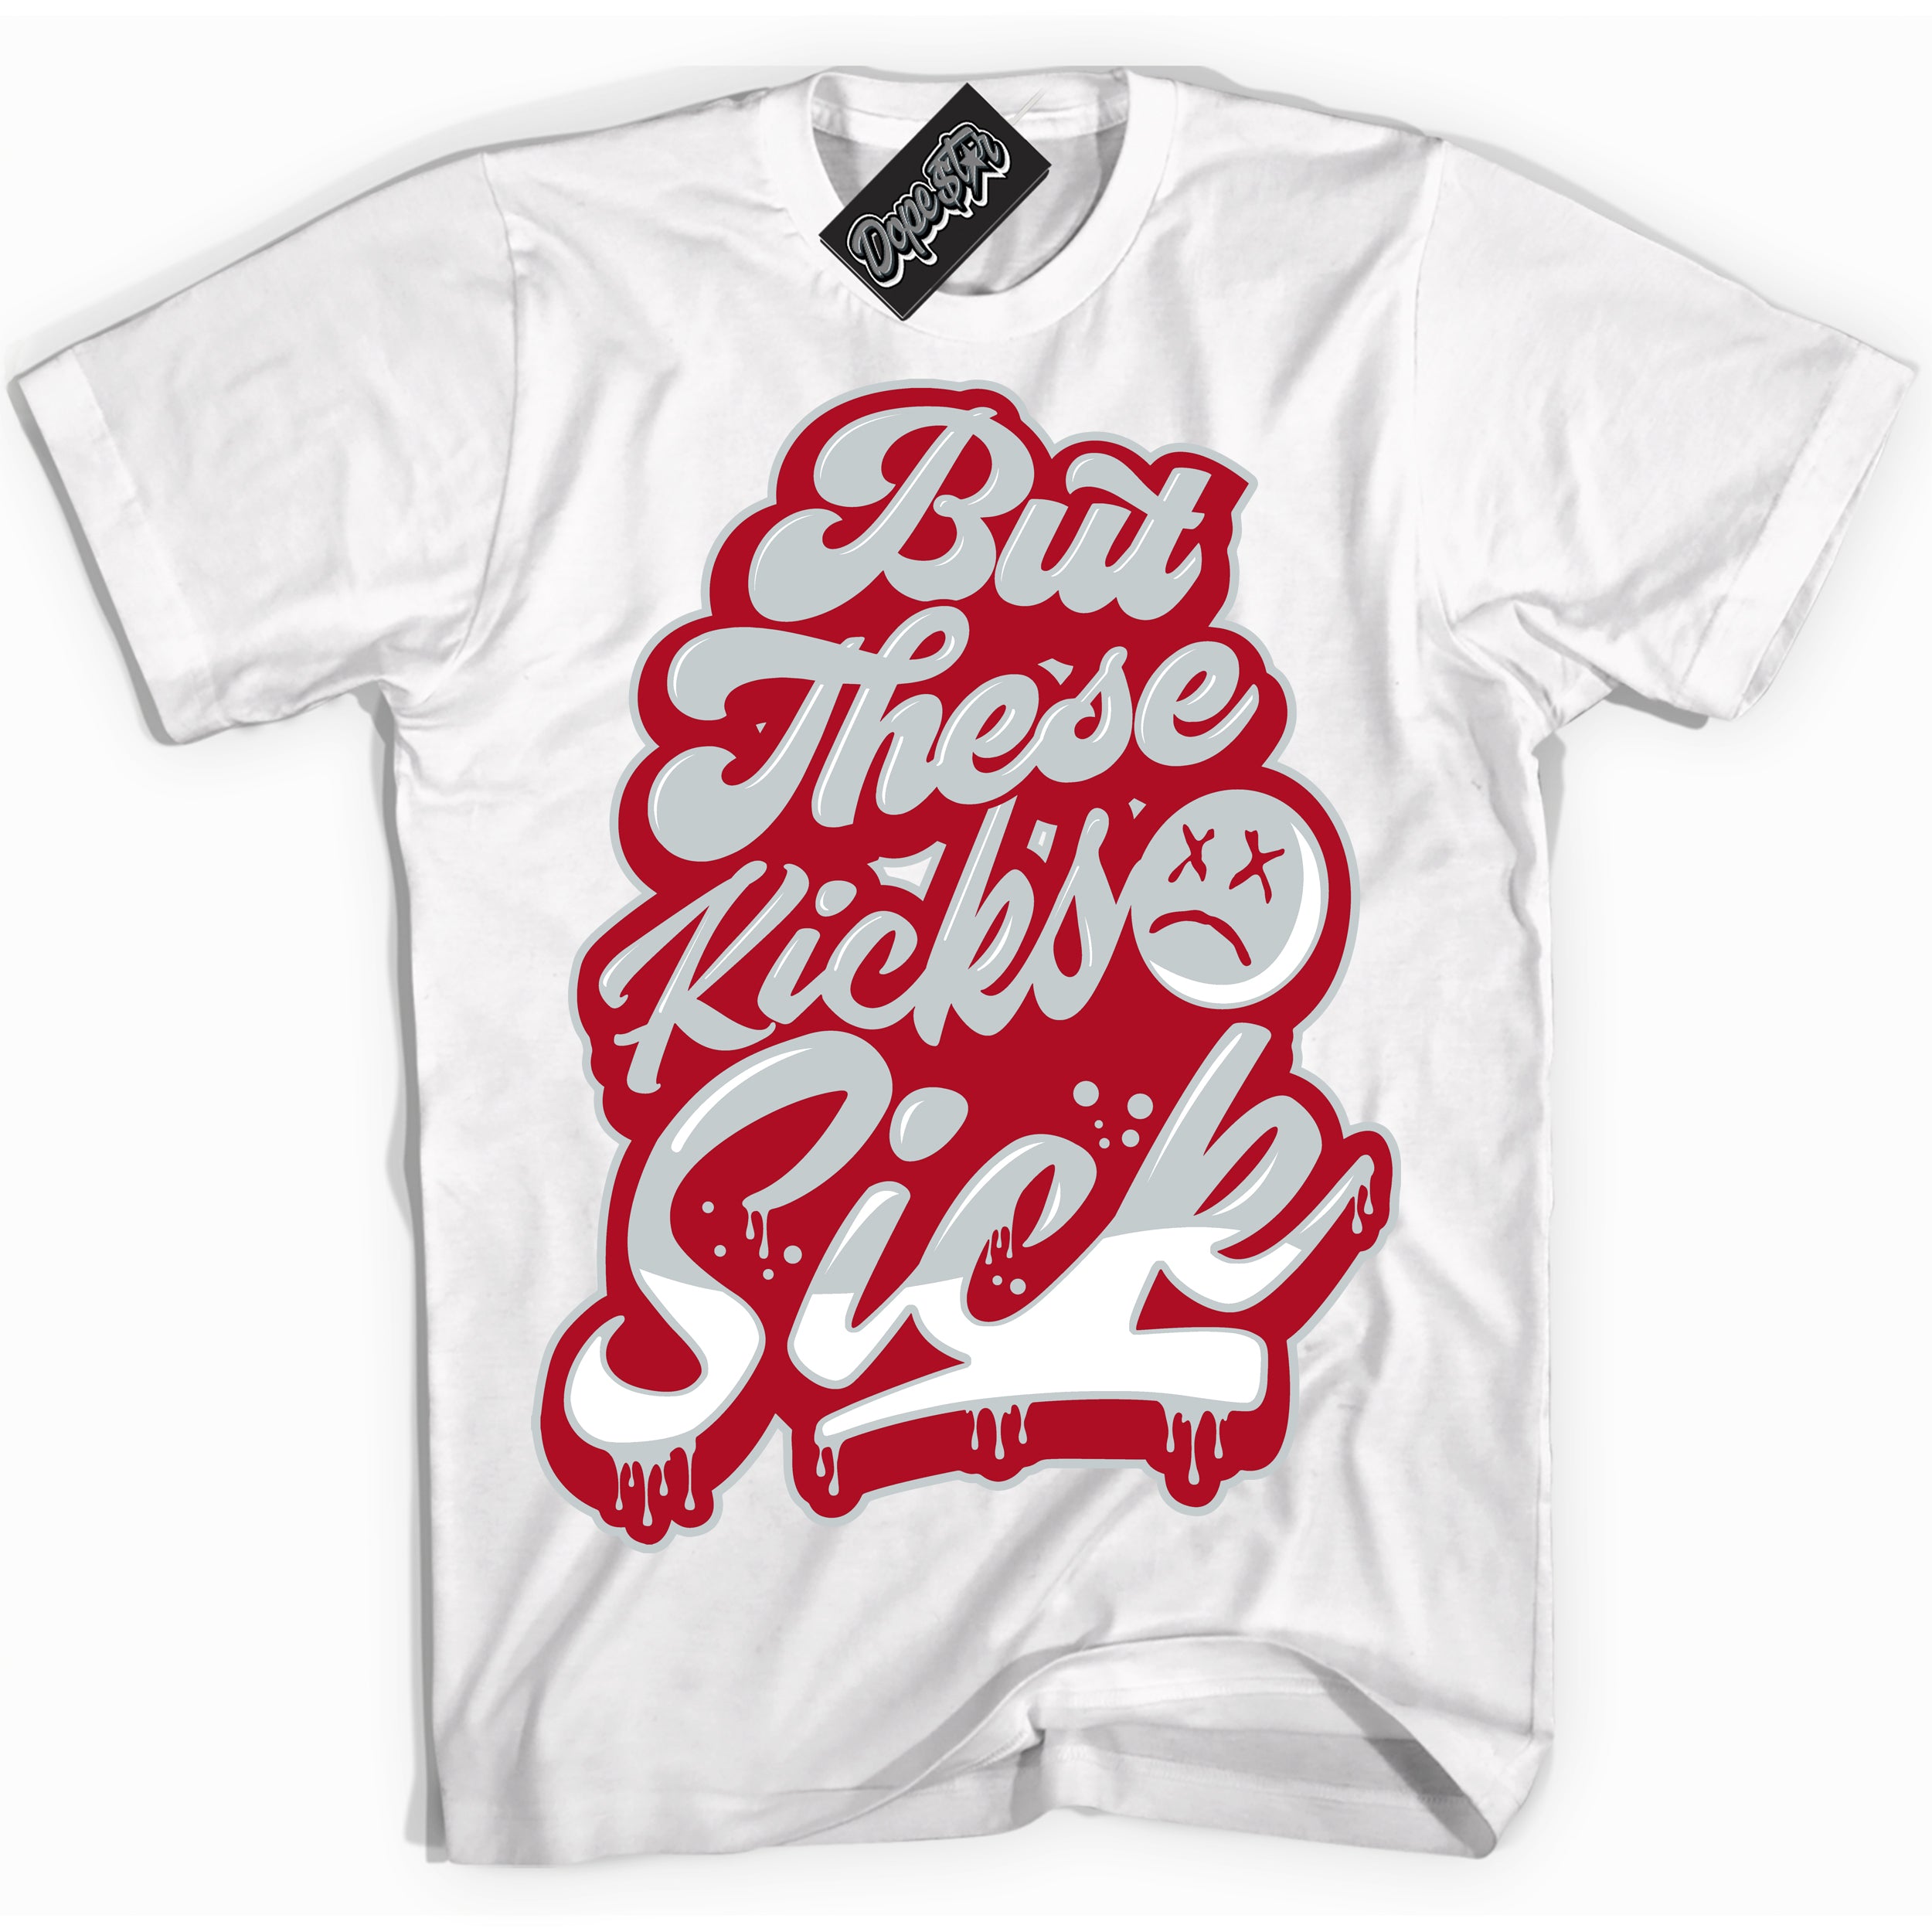 Cool White Shirt with “ Kick Sick ” design that perfectly matches Reverse Ultraman Sneakers.